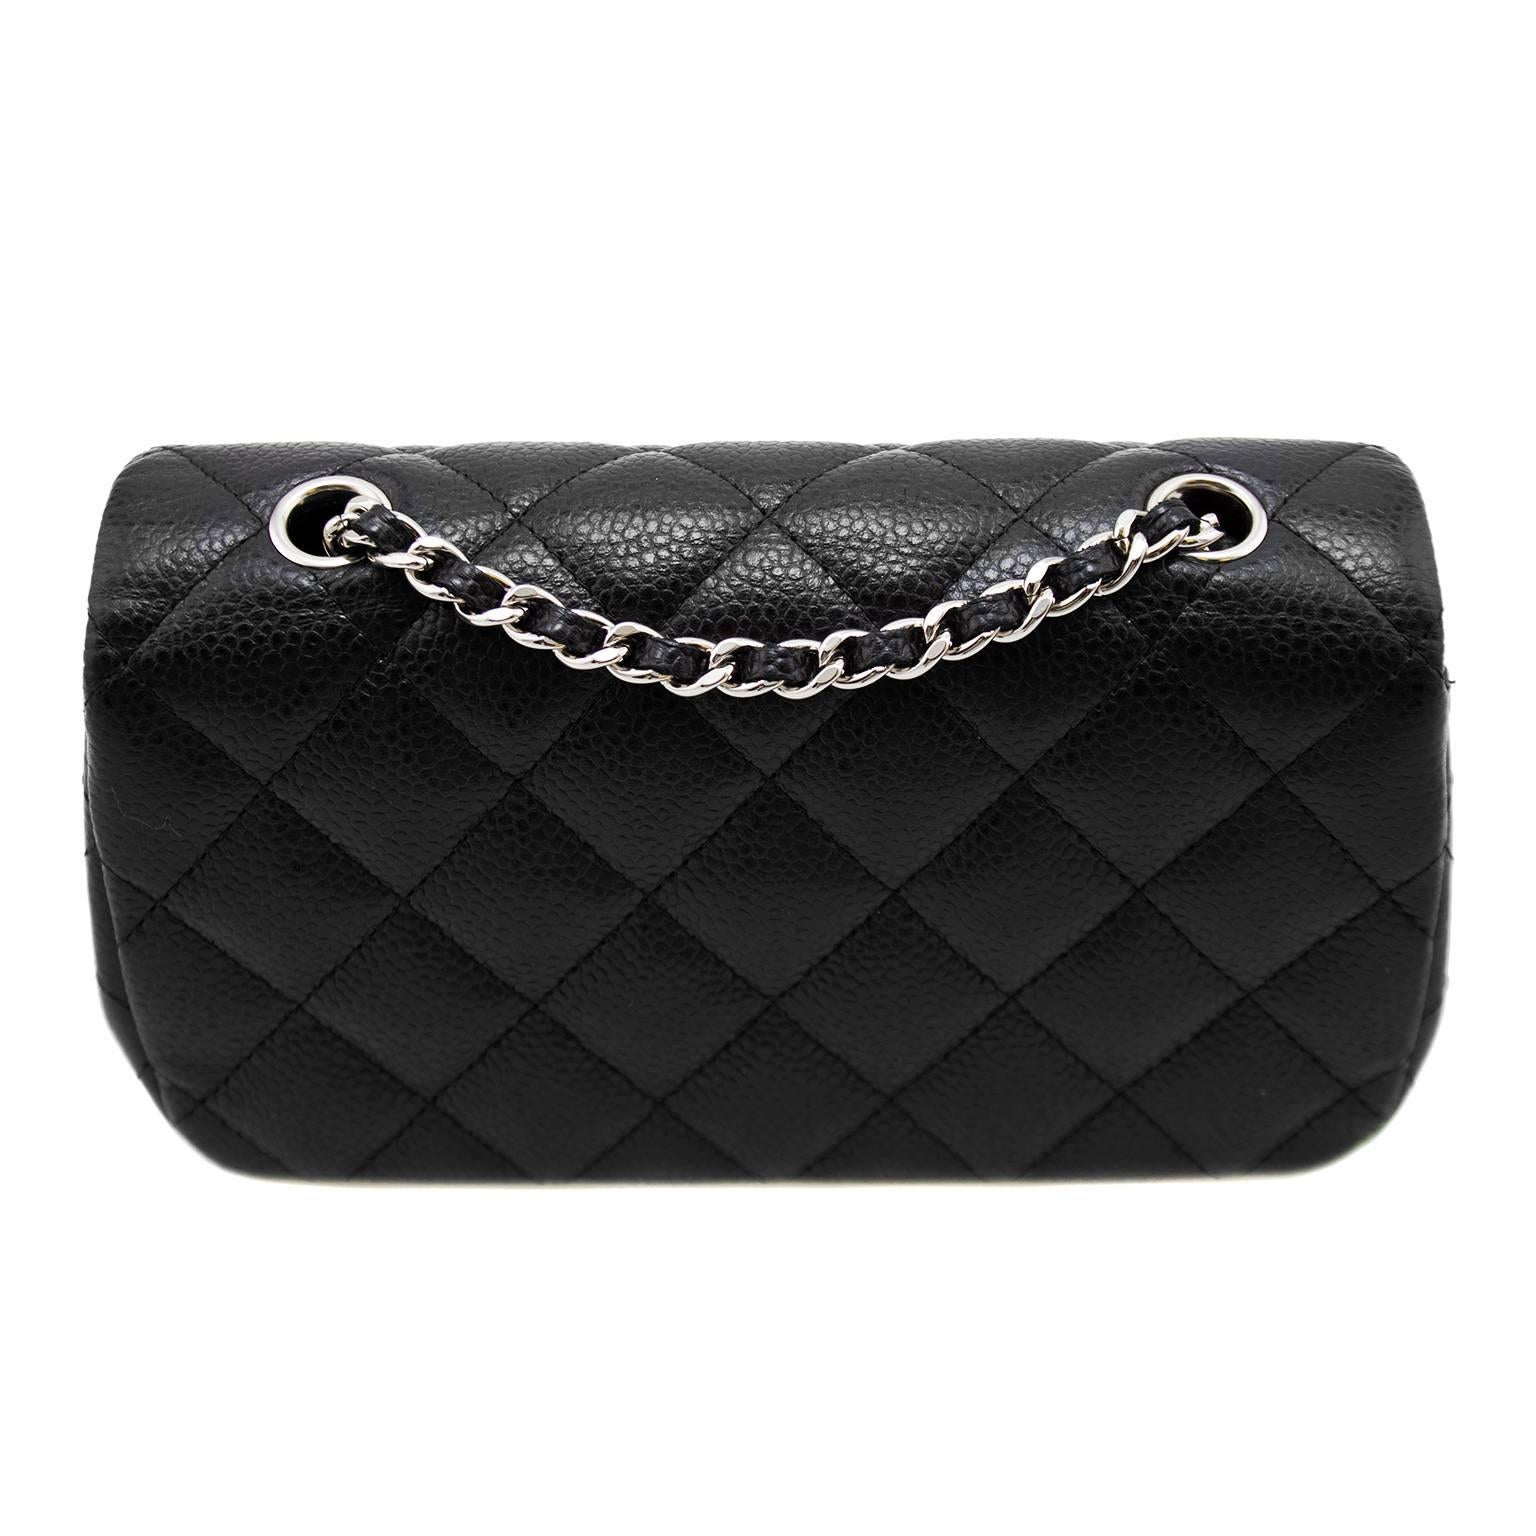 Women's or Men's 2013 Chanel Black Quilted Caviar Leather Chanel Classic Mini Flap Bag